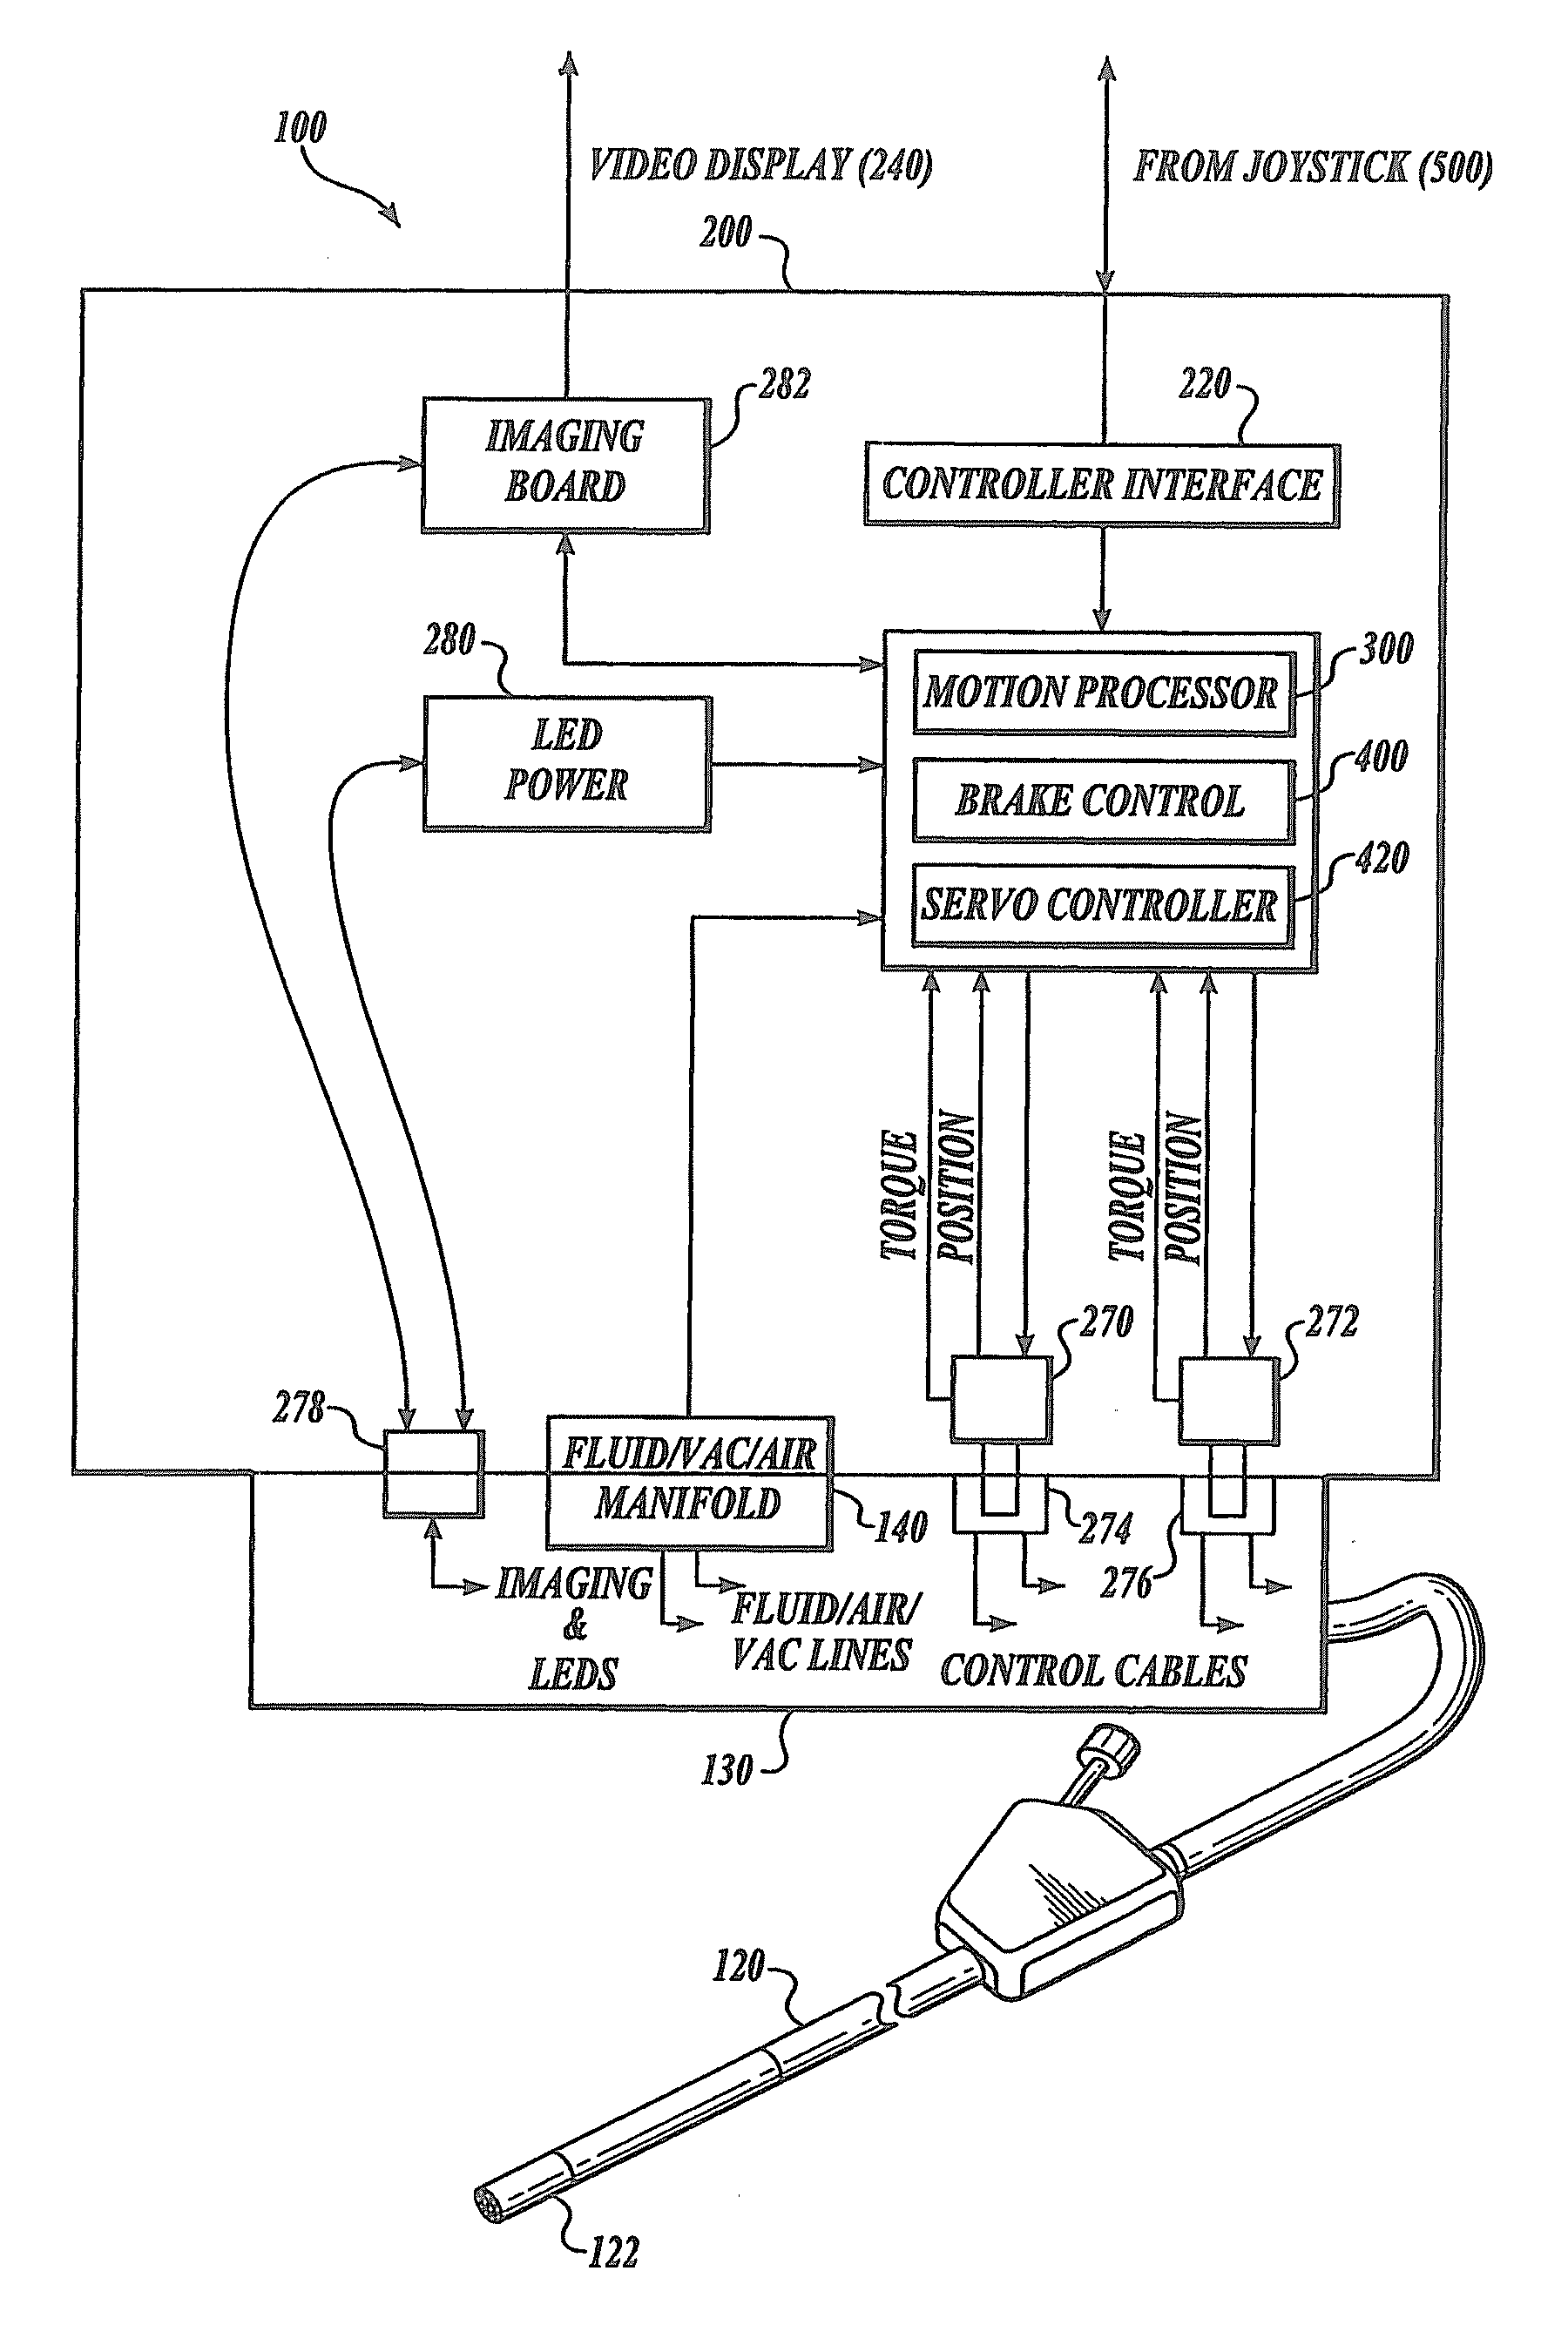 Programmable brake control system for use in a medical device